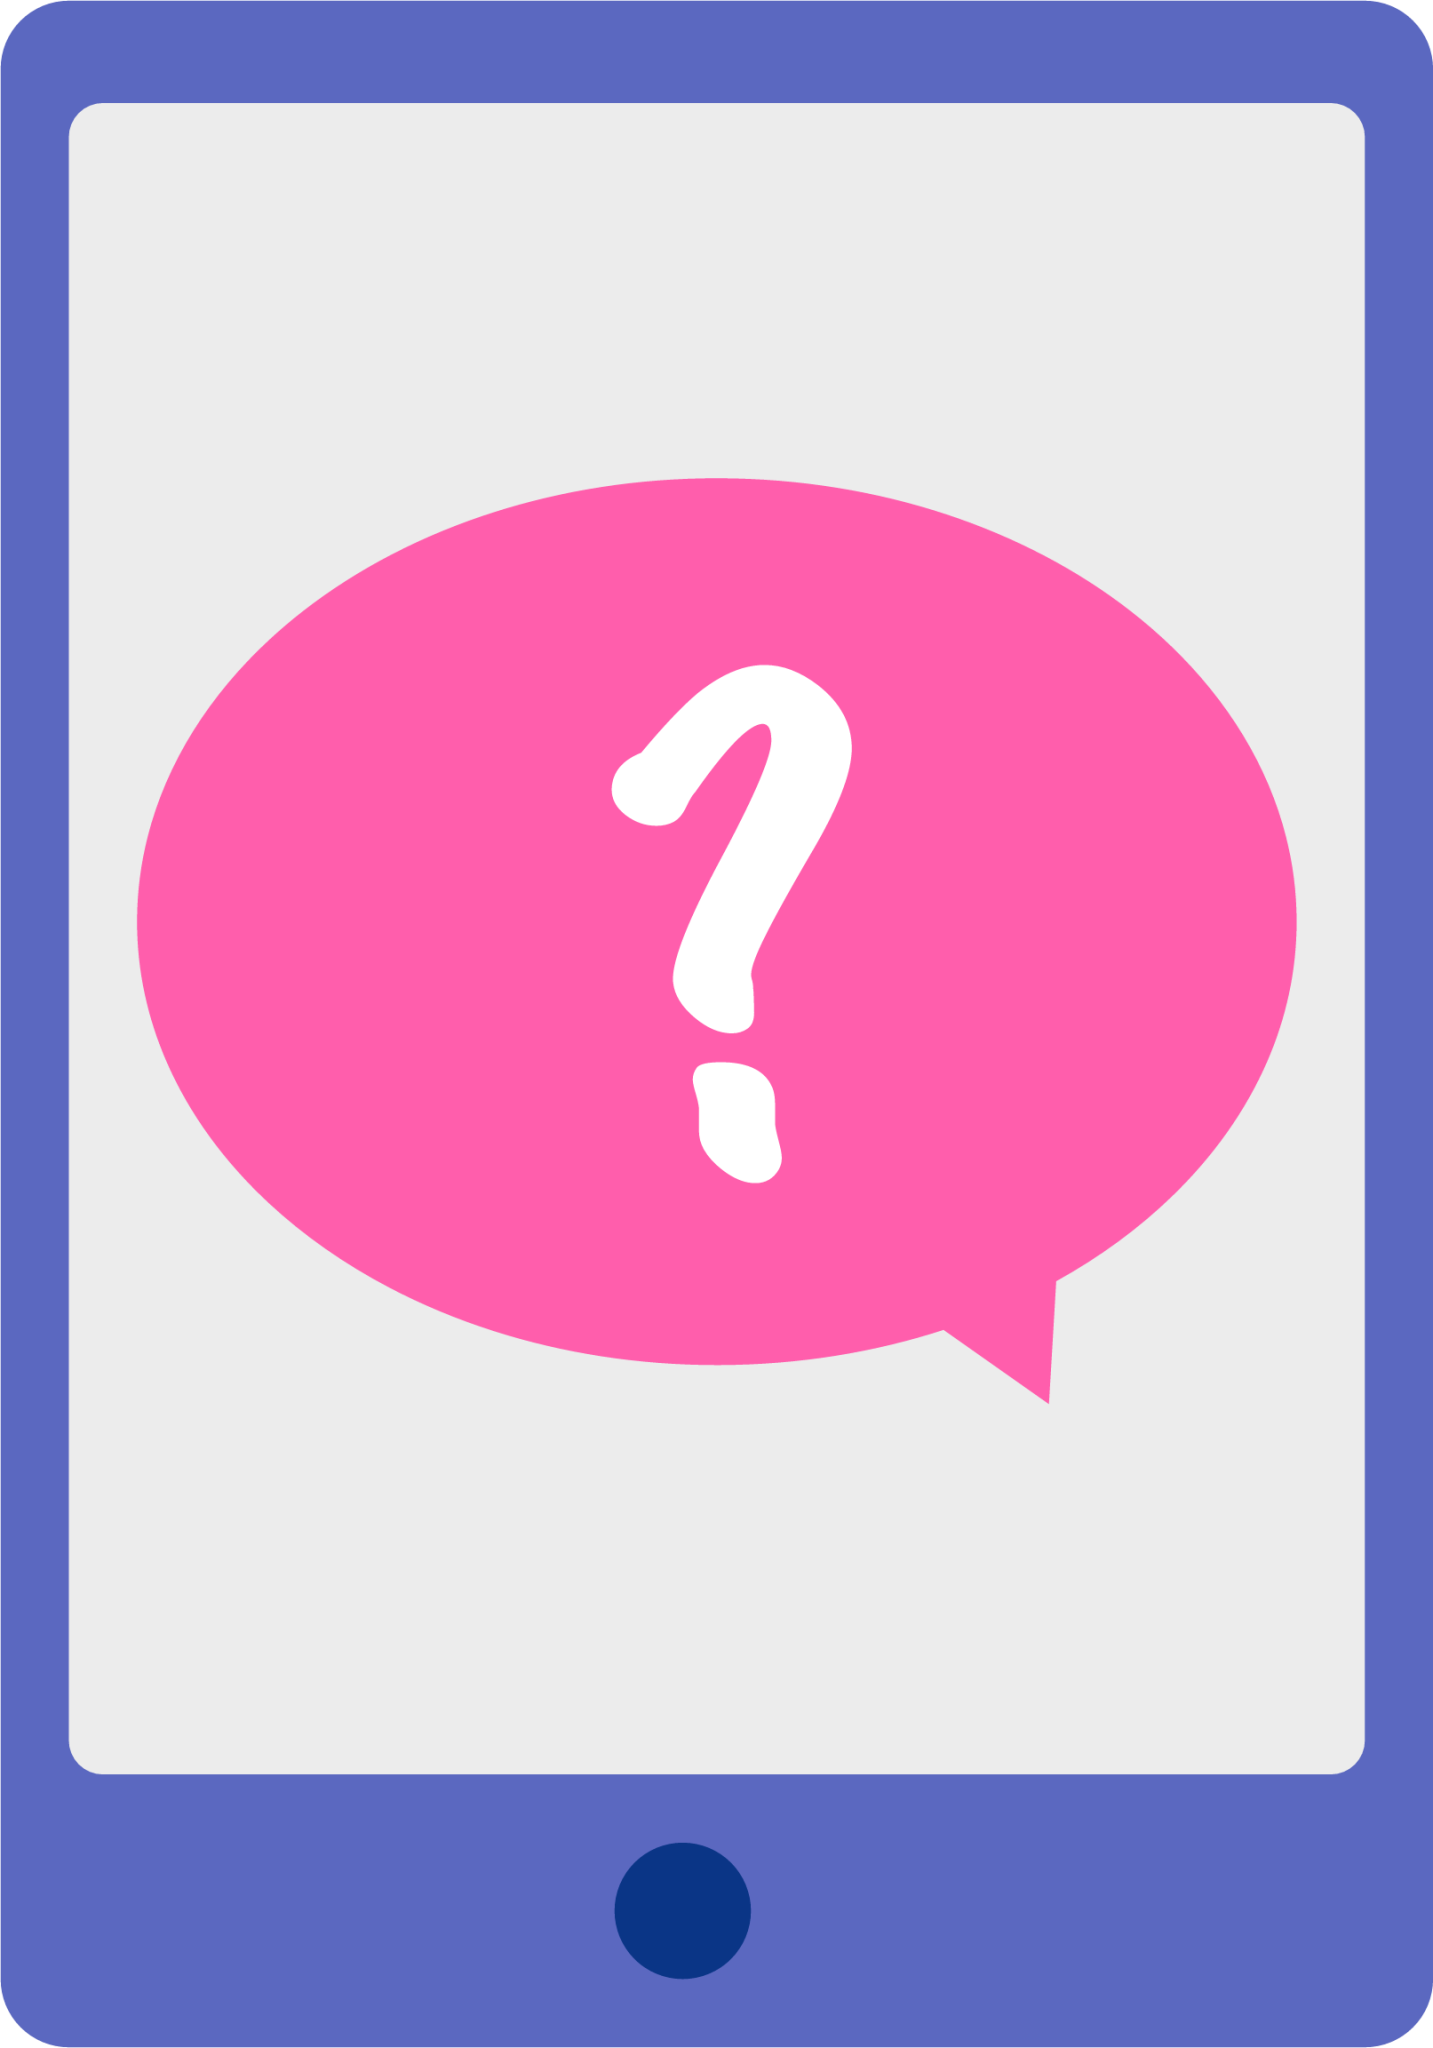 tablet question icon